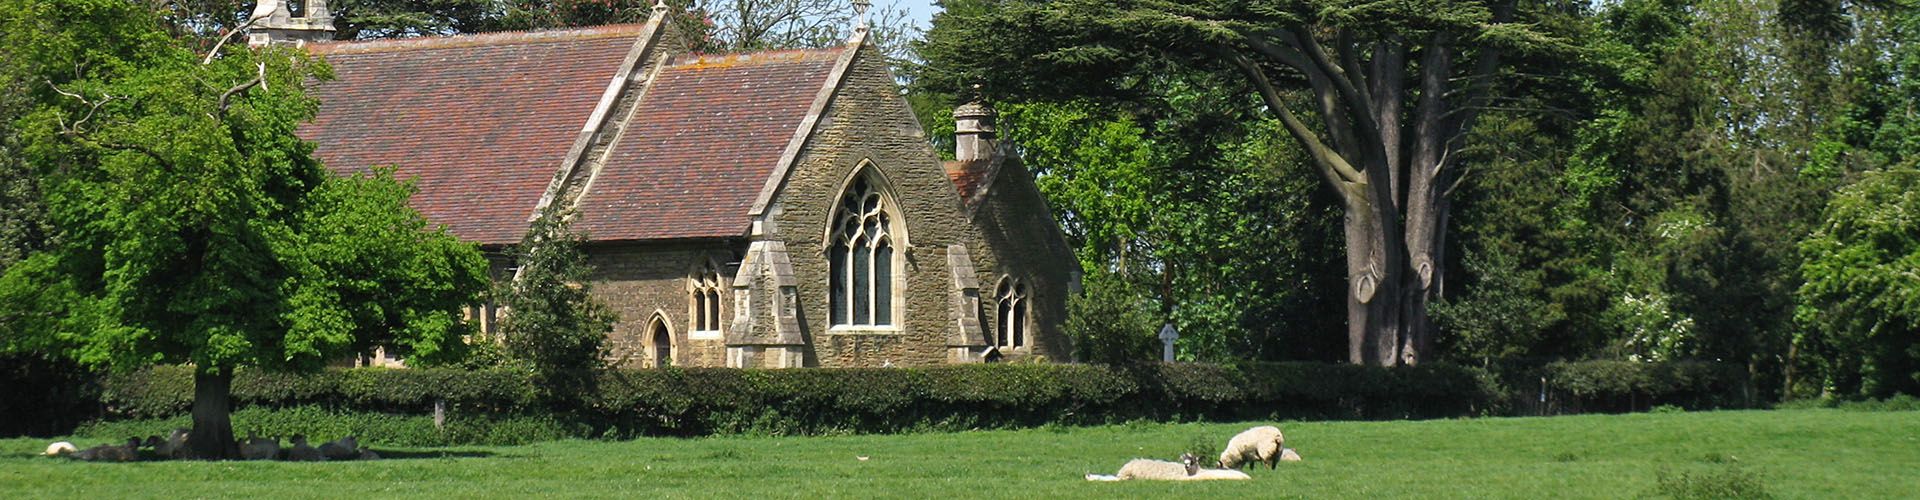 A view of a church with a green field containing sheep in the foreground.